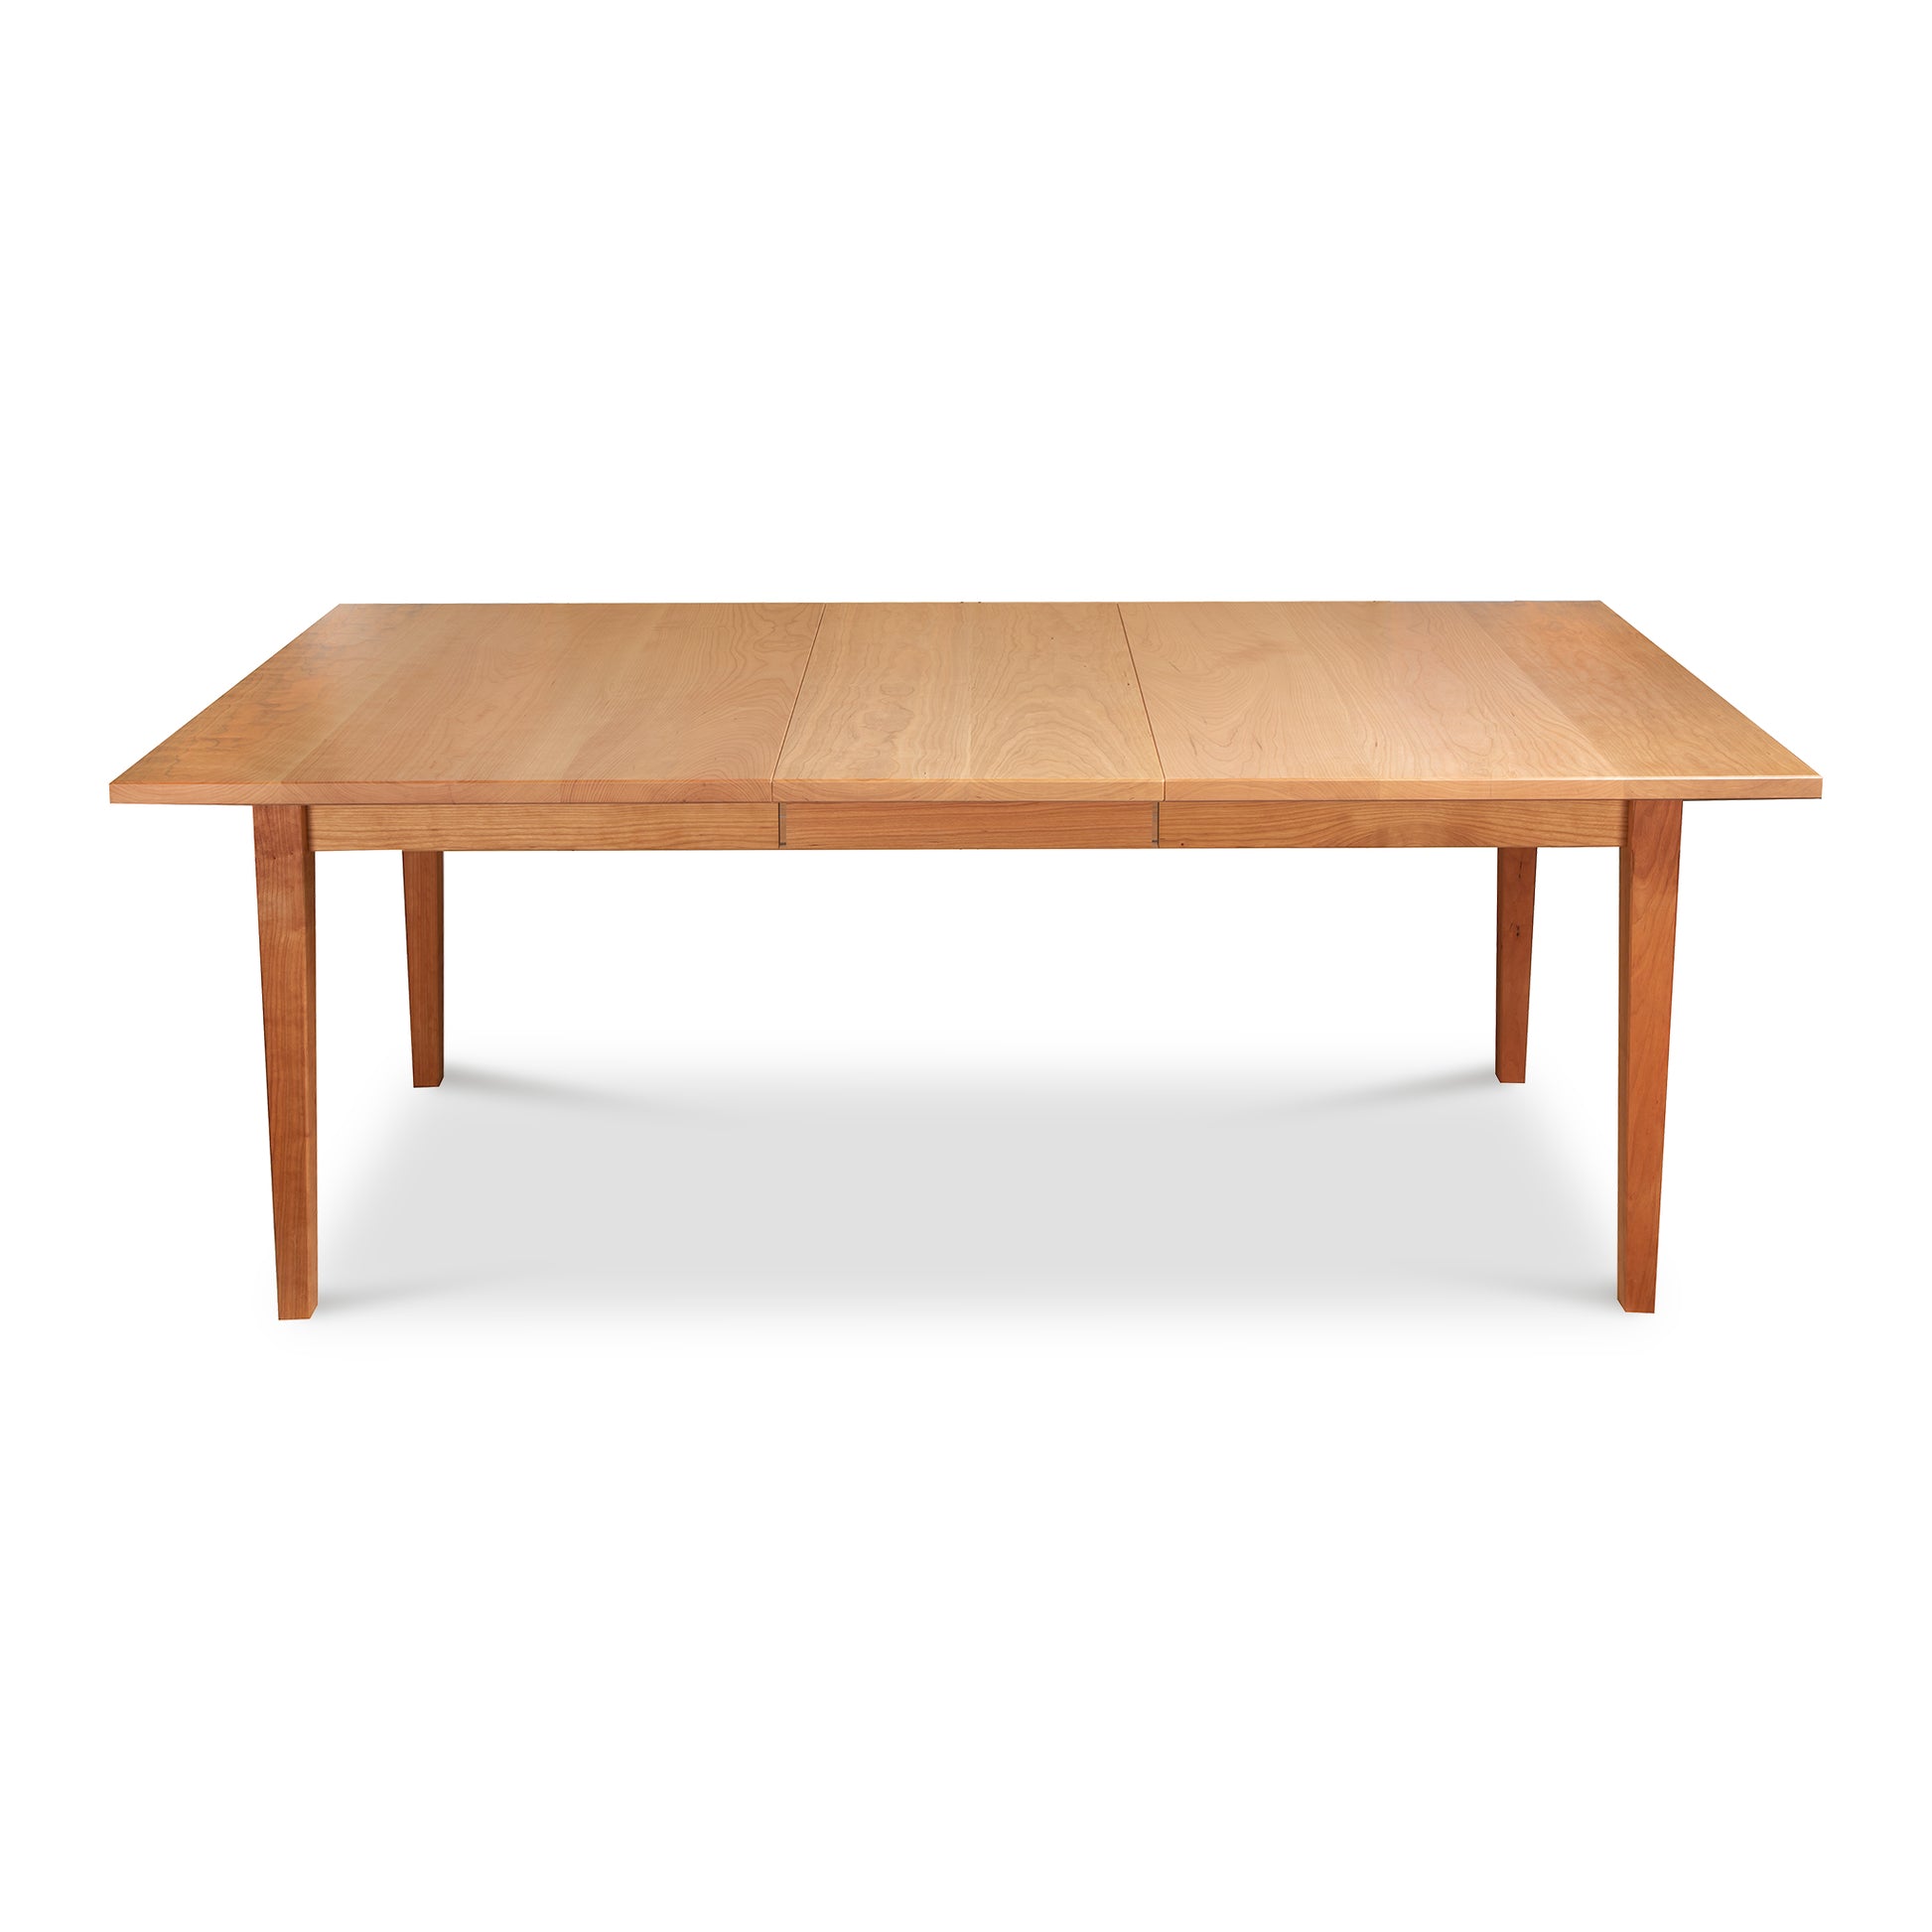 A Maple Corner Woodworks Vermont Shaker Rectangular Extension Dining Table with extendable leaves, isolated on a white background.